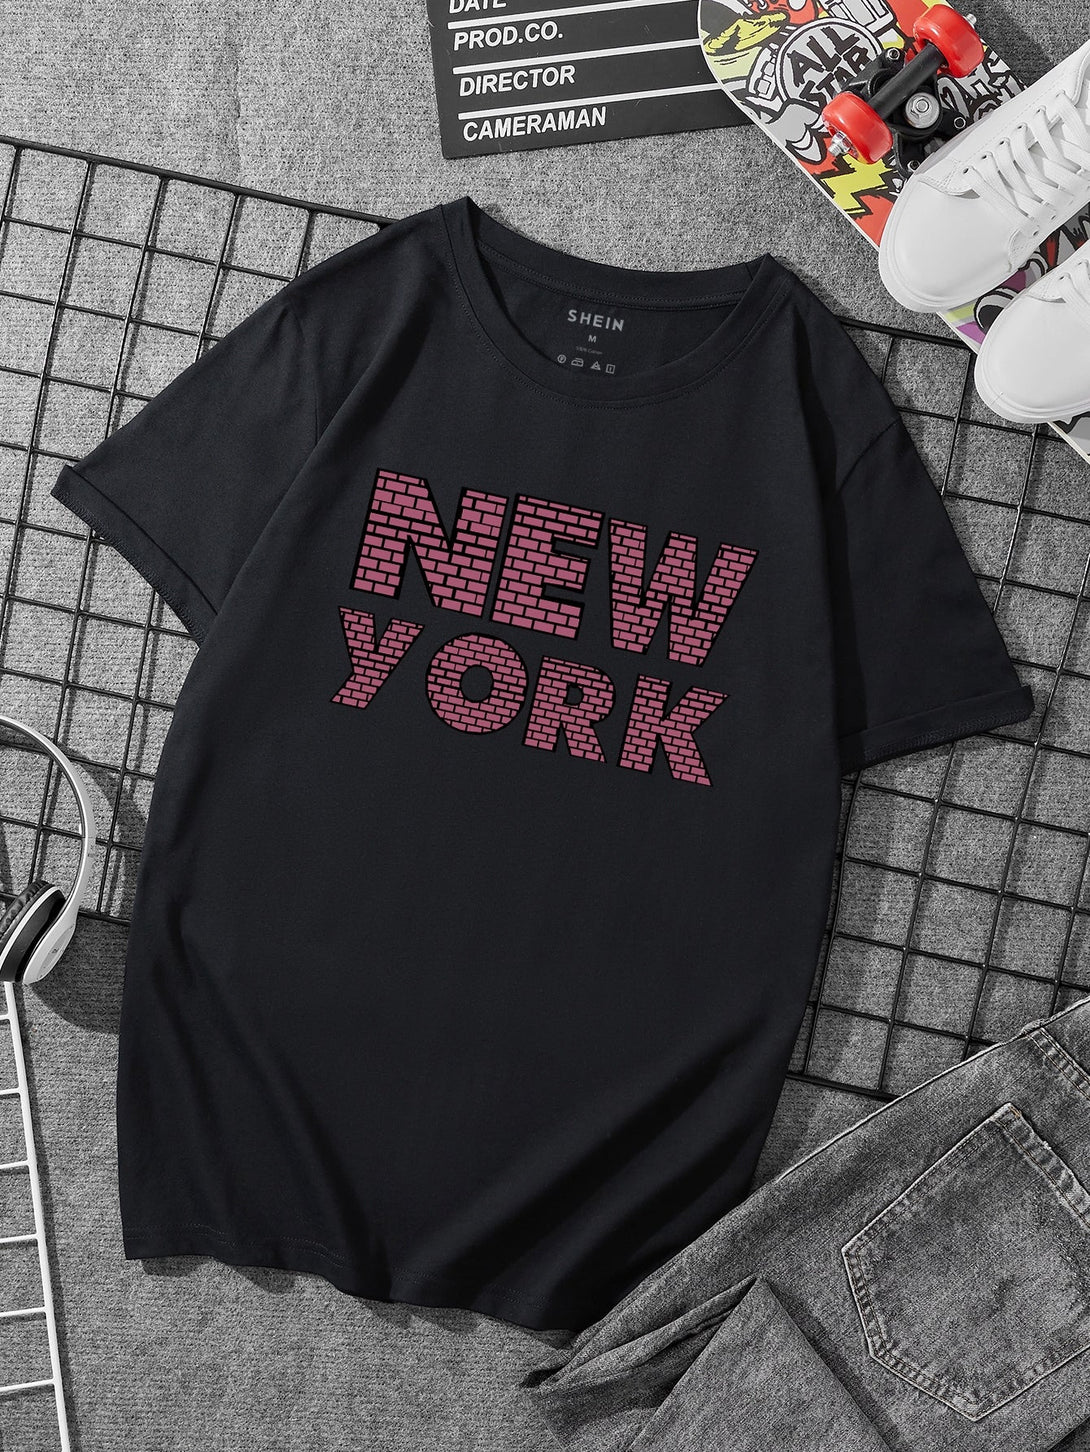 SHEIN New York Letter Graphic Tee - Negative Apparel